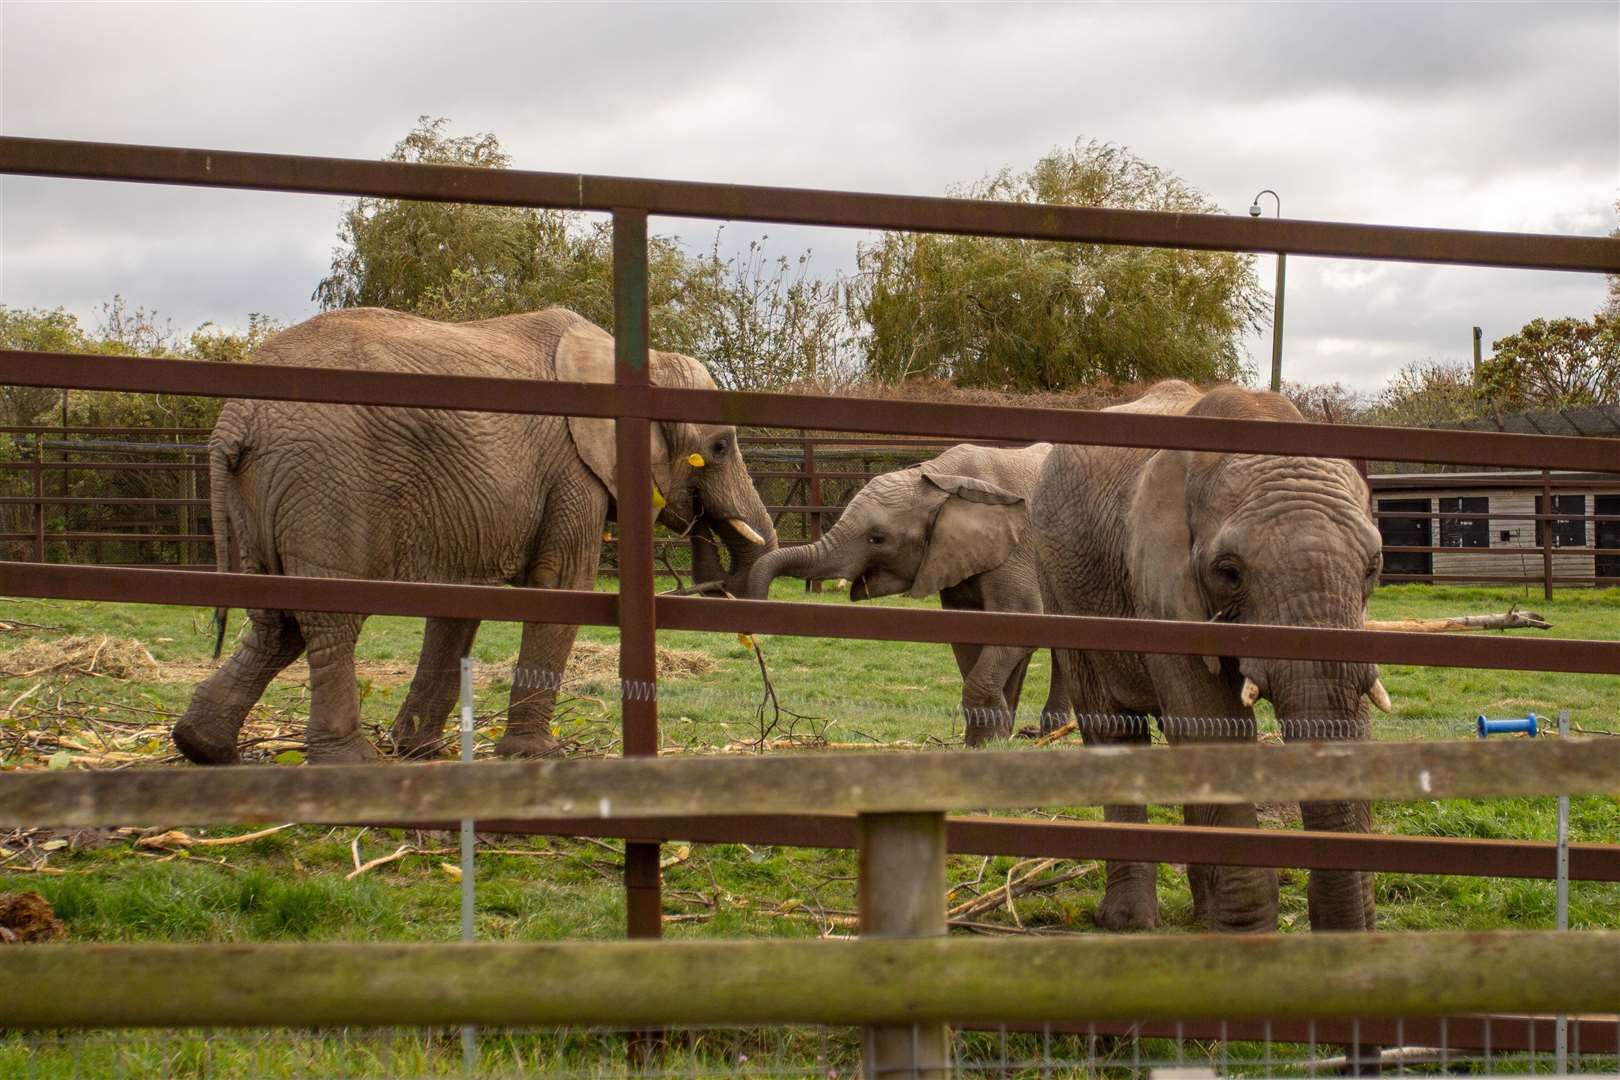 The elephants are one of the most popular attractions at Howletts. Picture: Aspinall Foundation